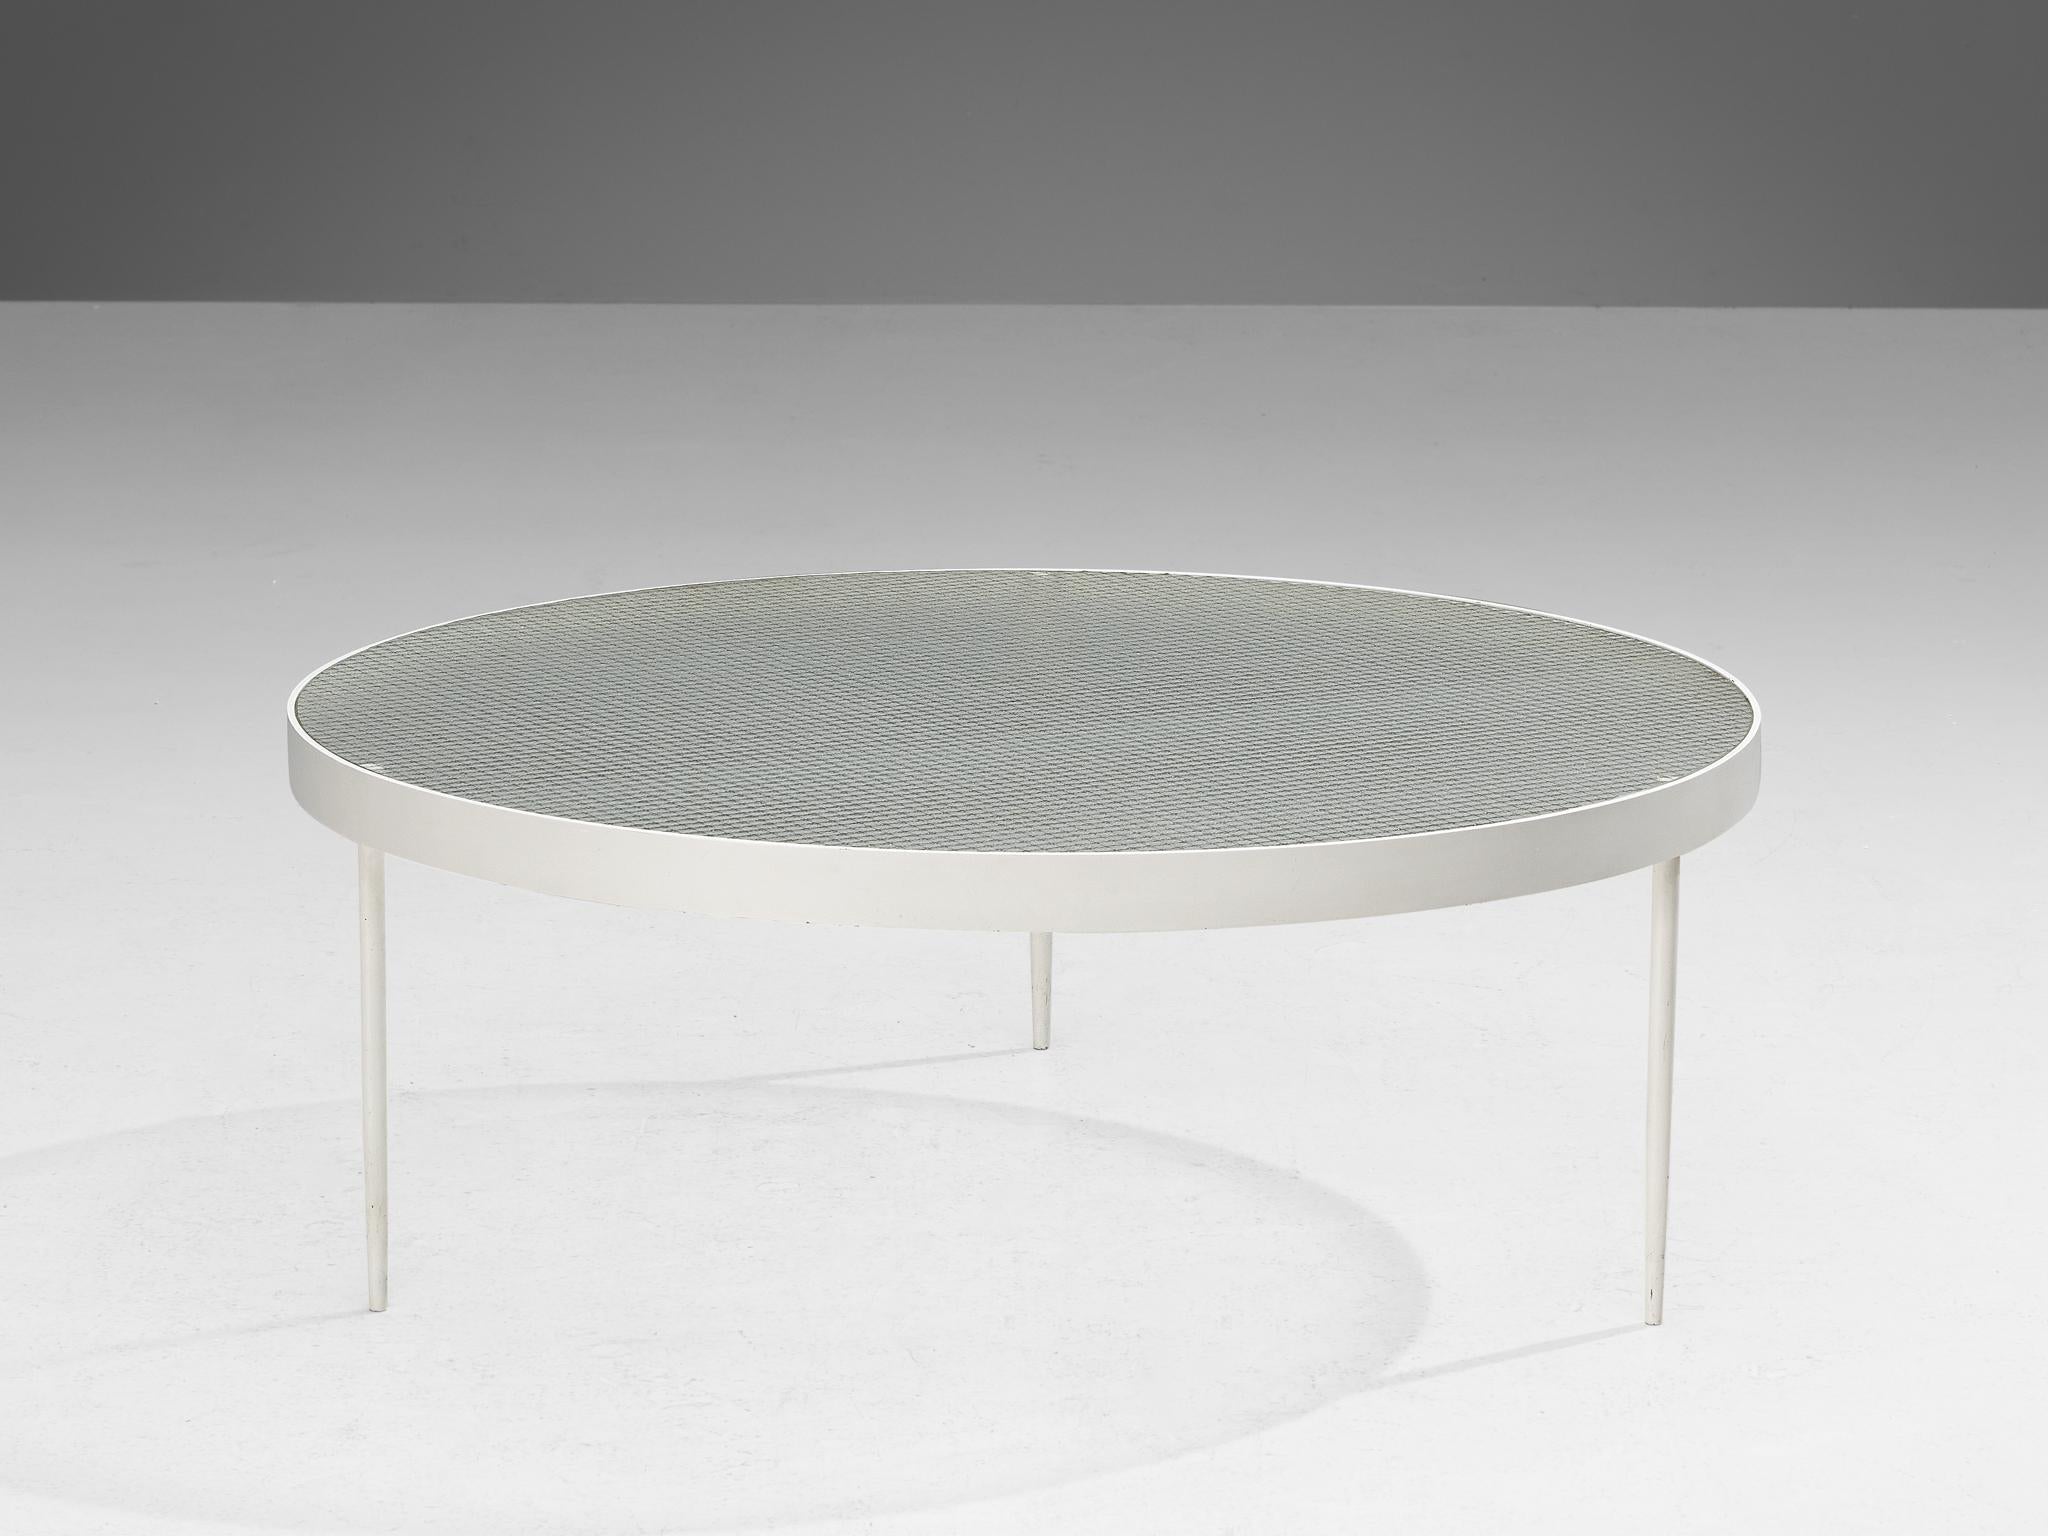 Janni Van Pelt, 'G4' coffee table, wired glass, white lacquered metal, Netherlands, design 1958

Round coffee table in white coated metal and clear wired glass. This table is a variation on Janni Van Pelts model G4, of which there are multiple. The